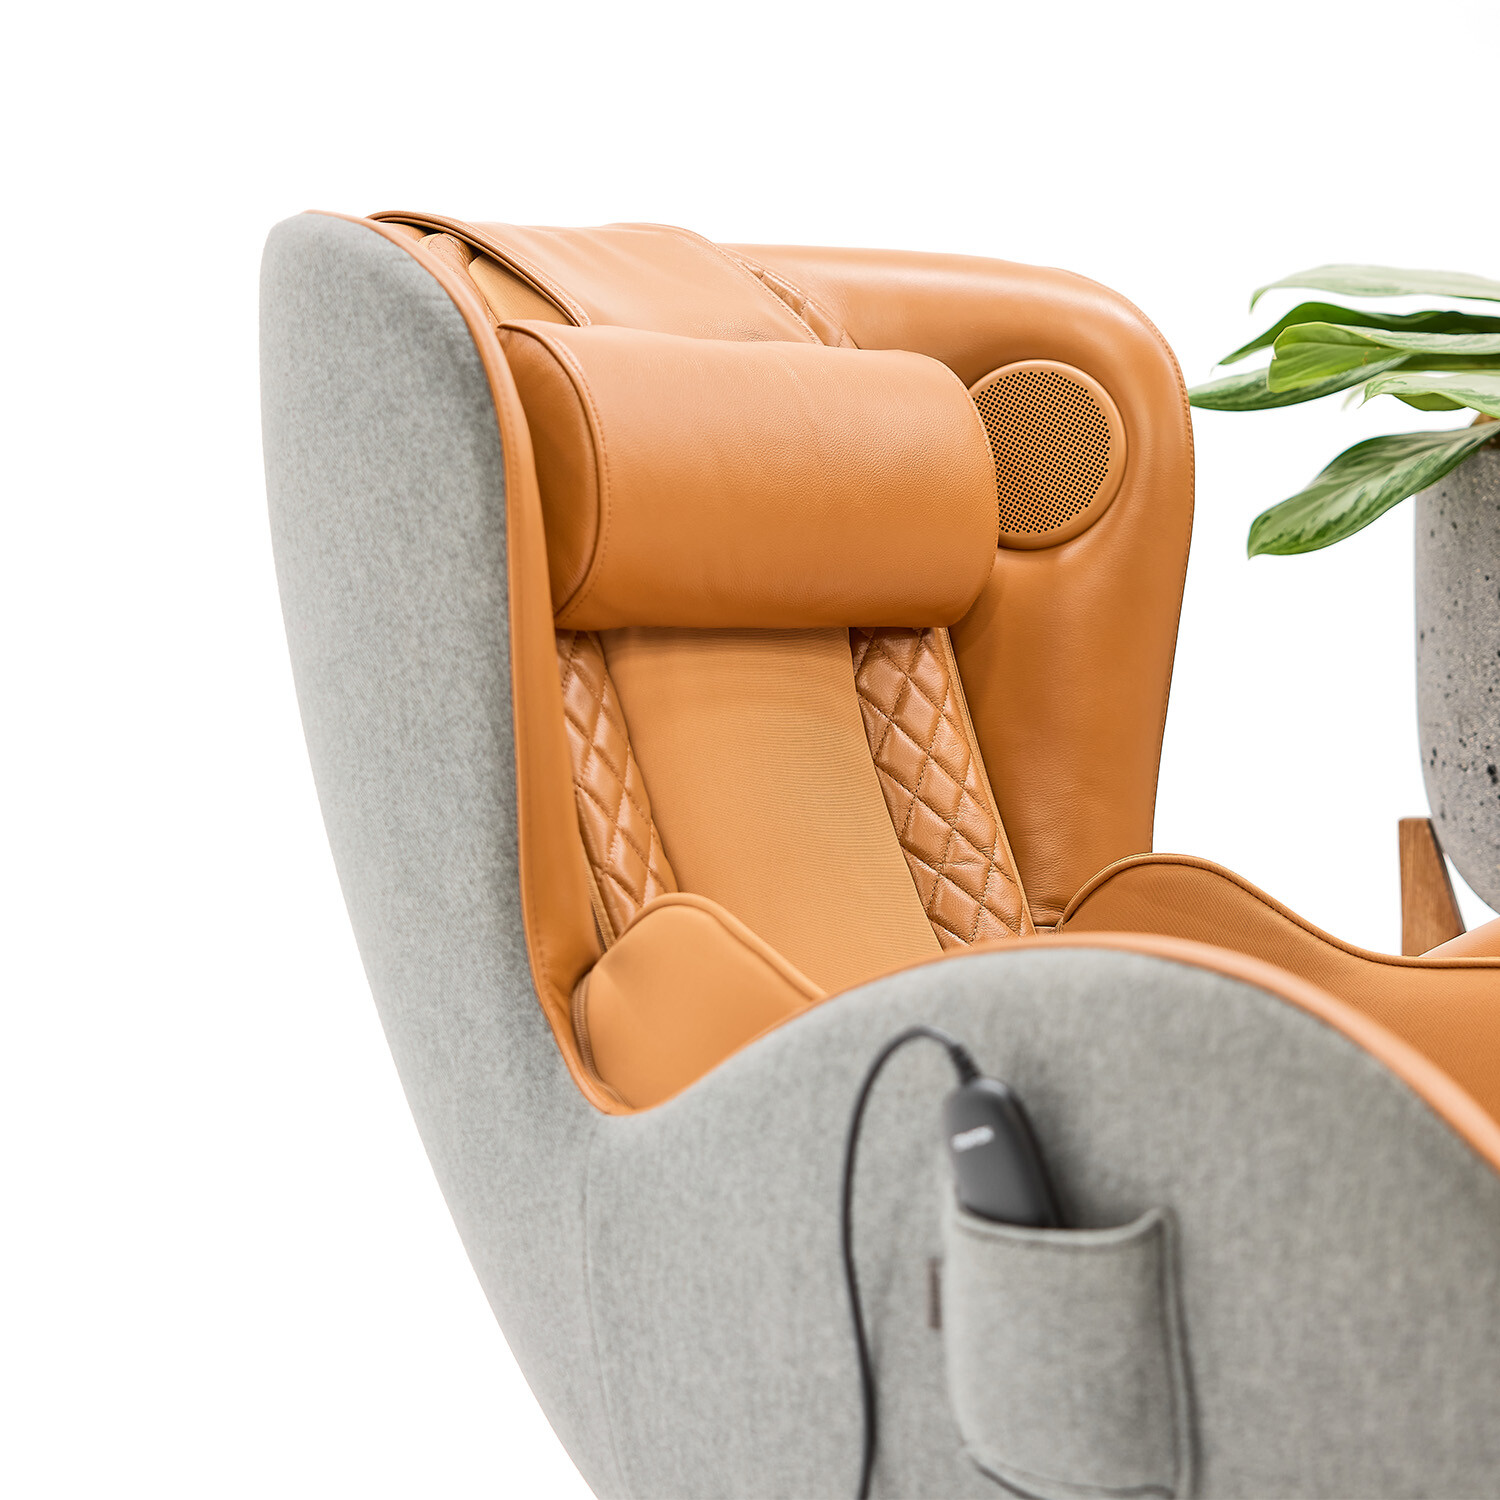 NOUHAUS Classic Leather Massage Chair with Ottoman, Caramel